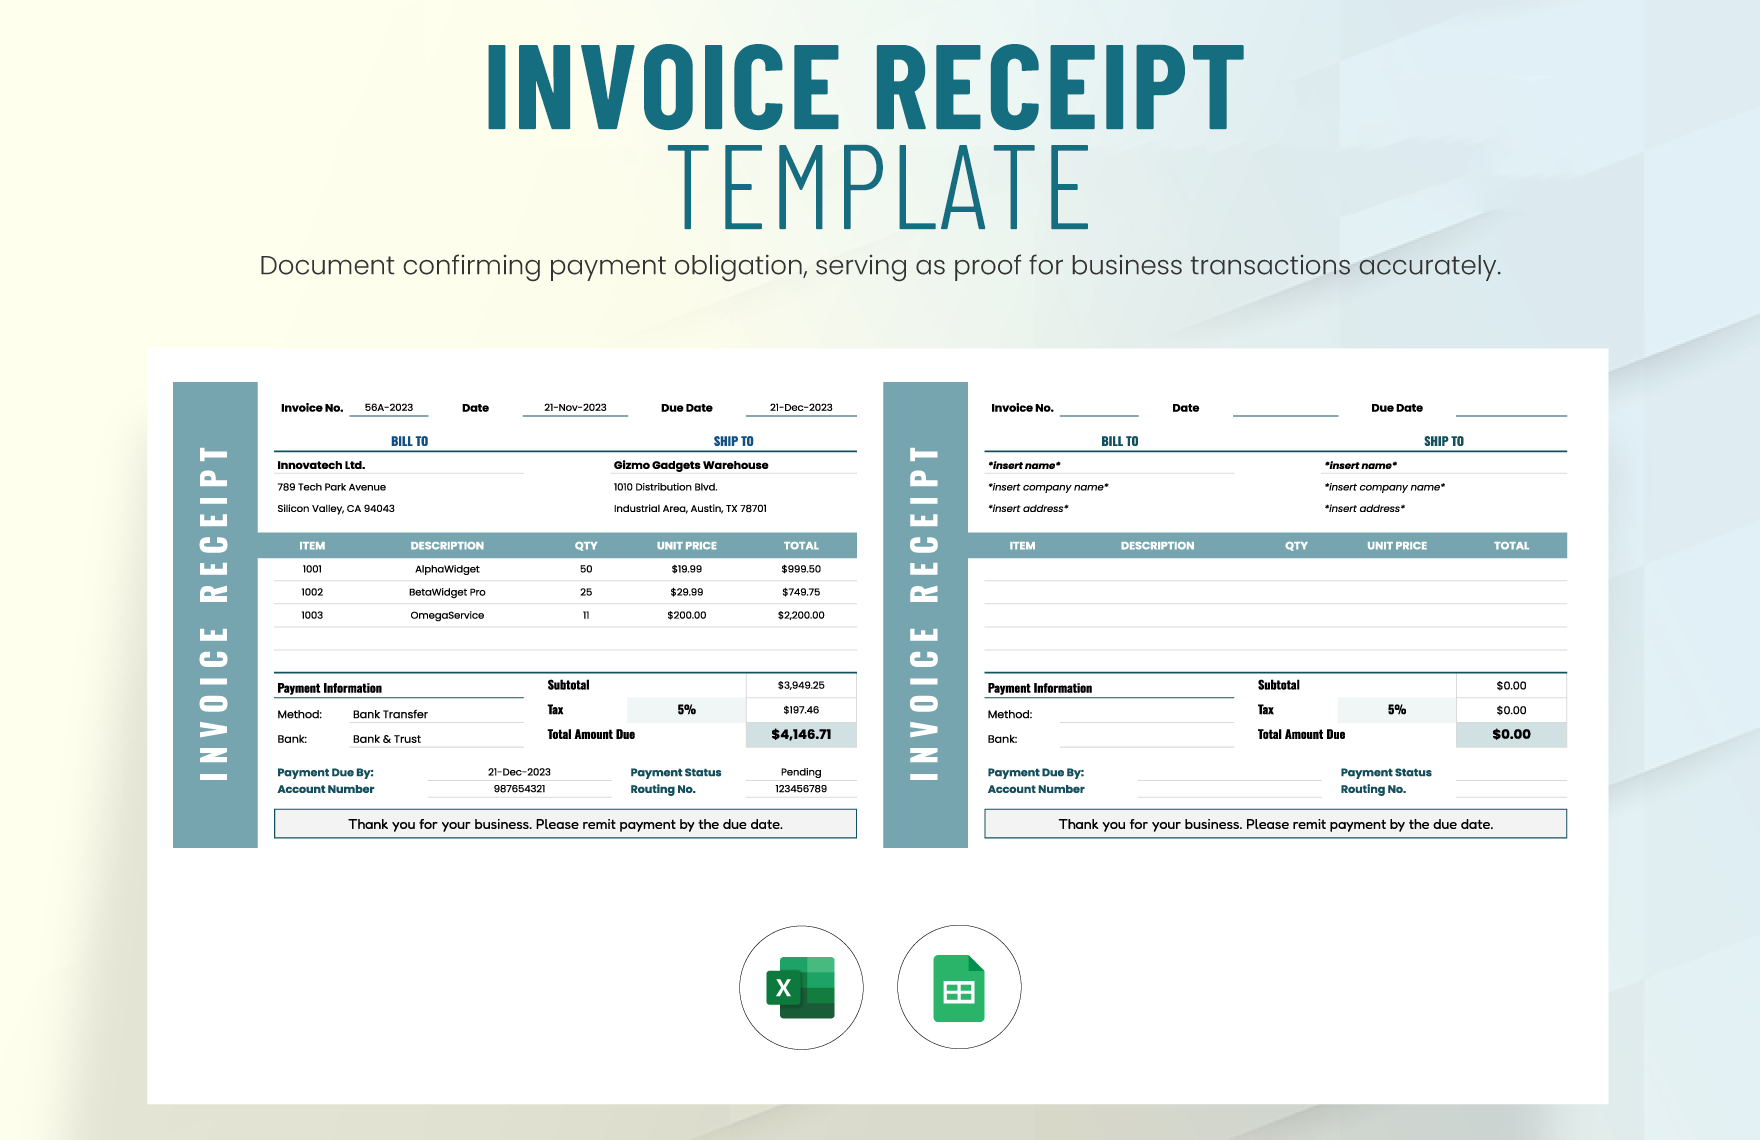 Invoice Receipt Template in Excel, Google Sheets